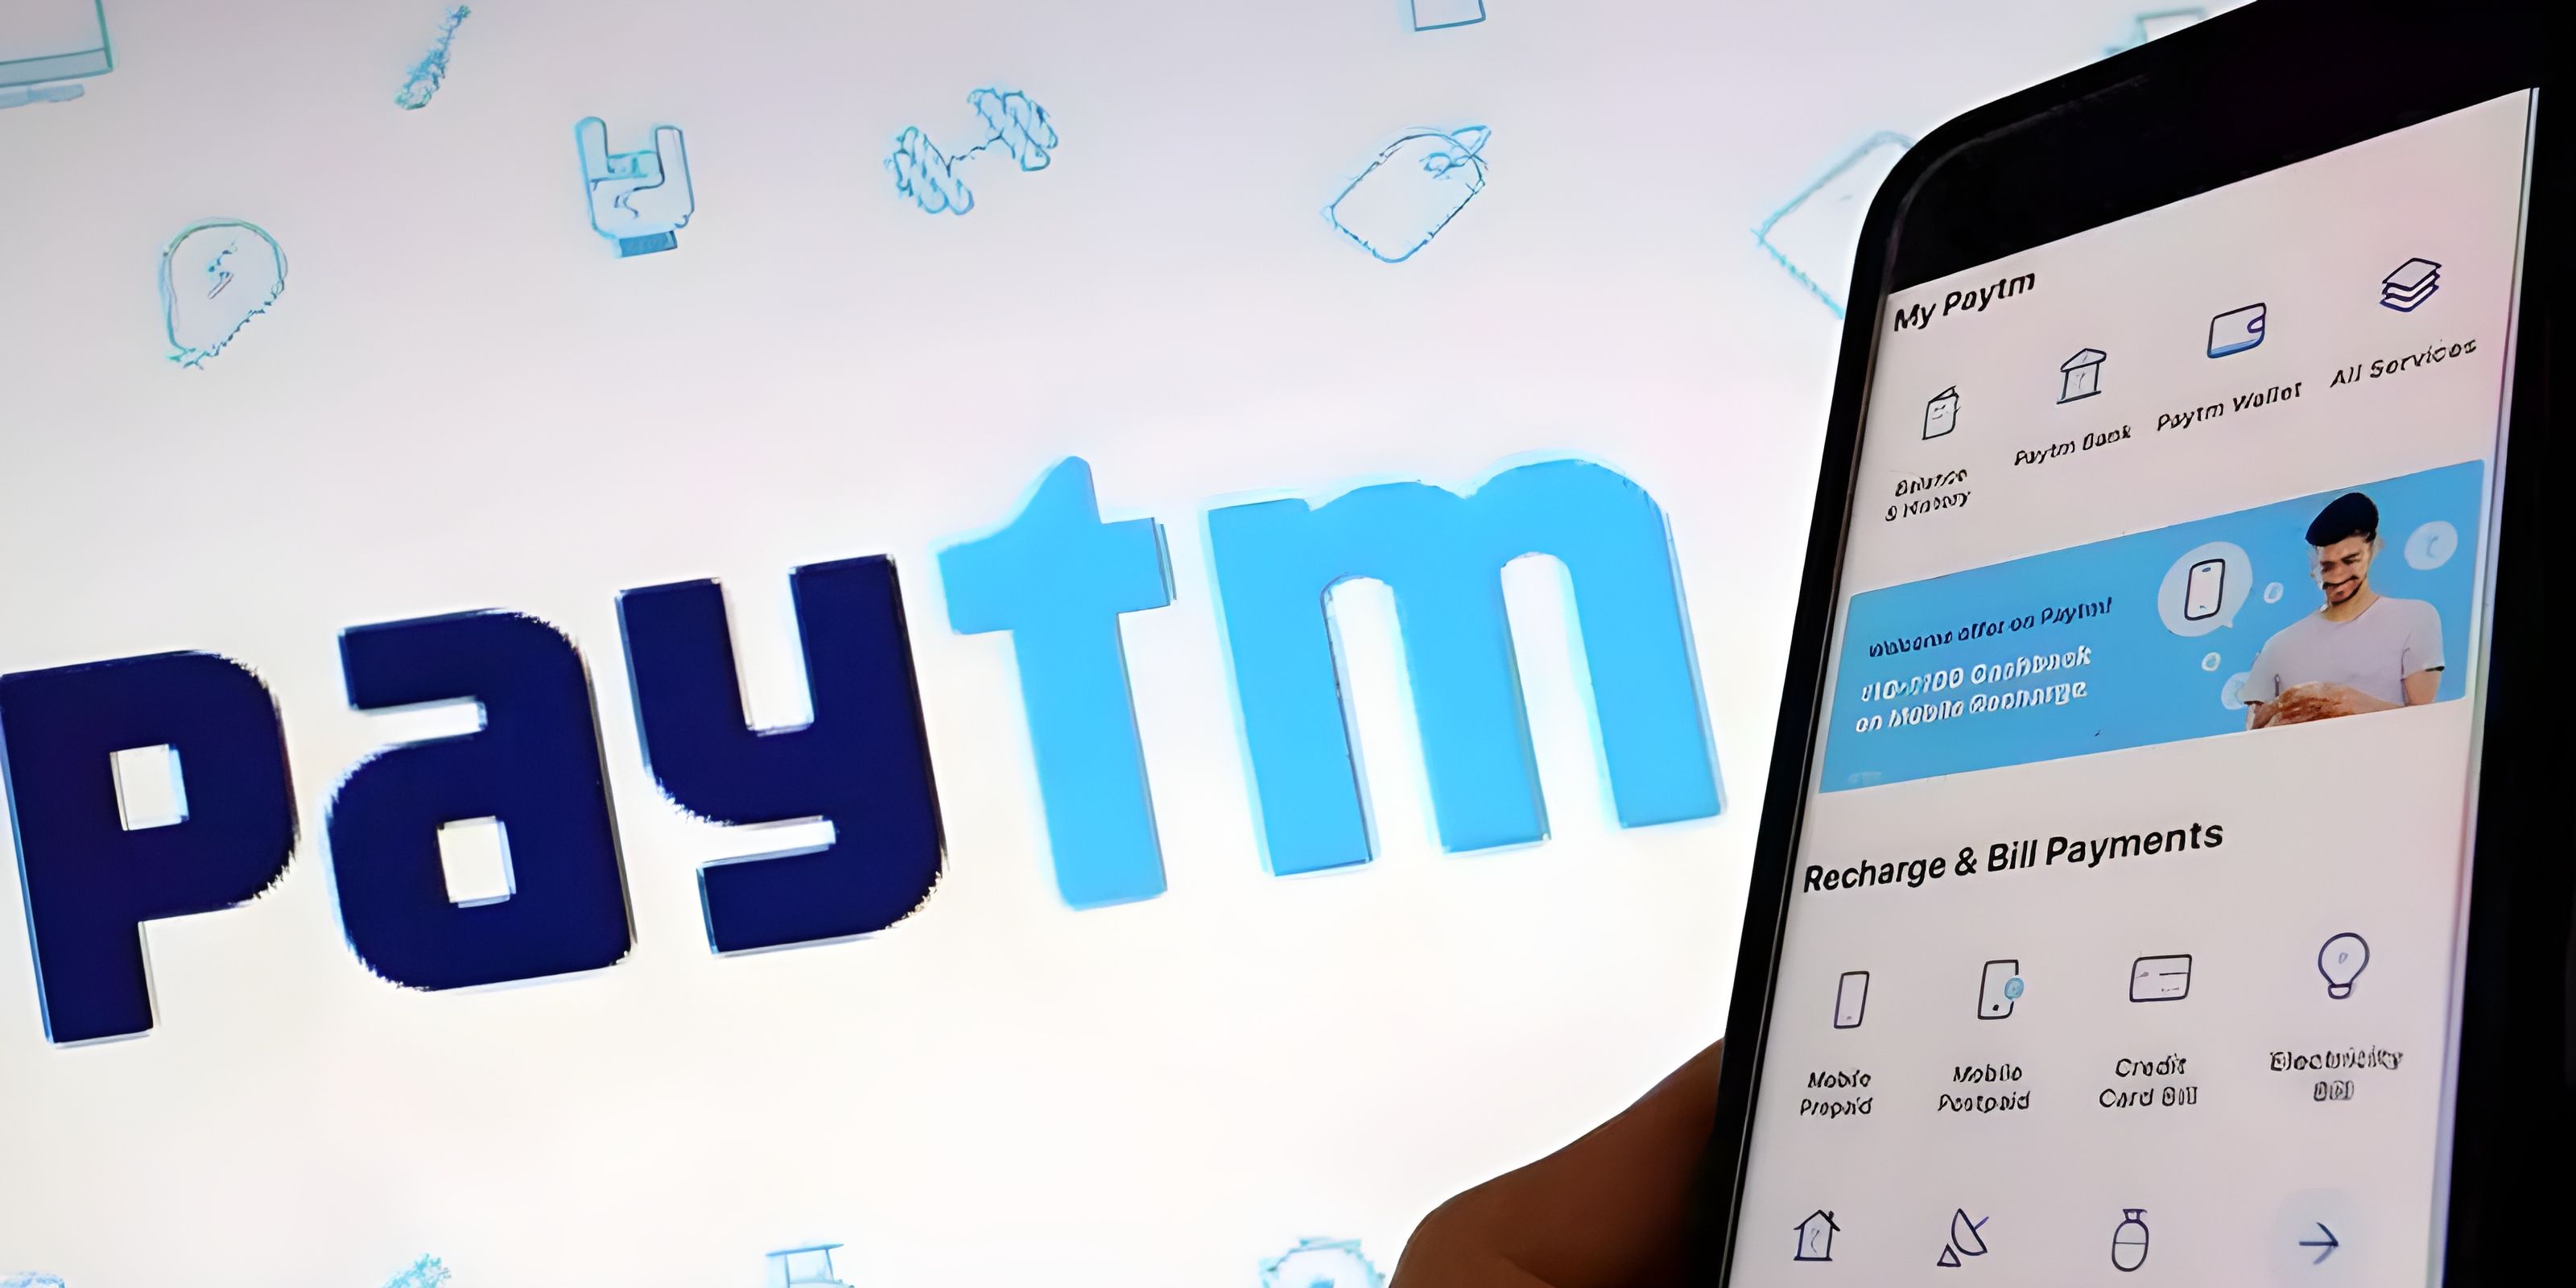 SoftBank offloads another 2% stake in Paytm worth Rs 950 Cr